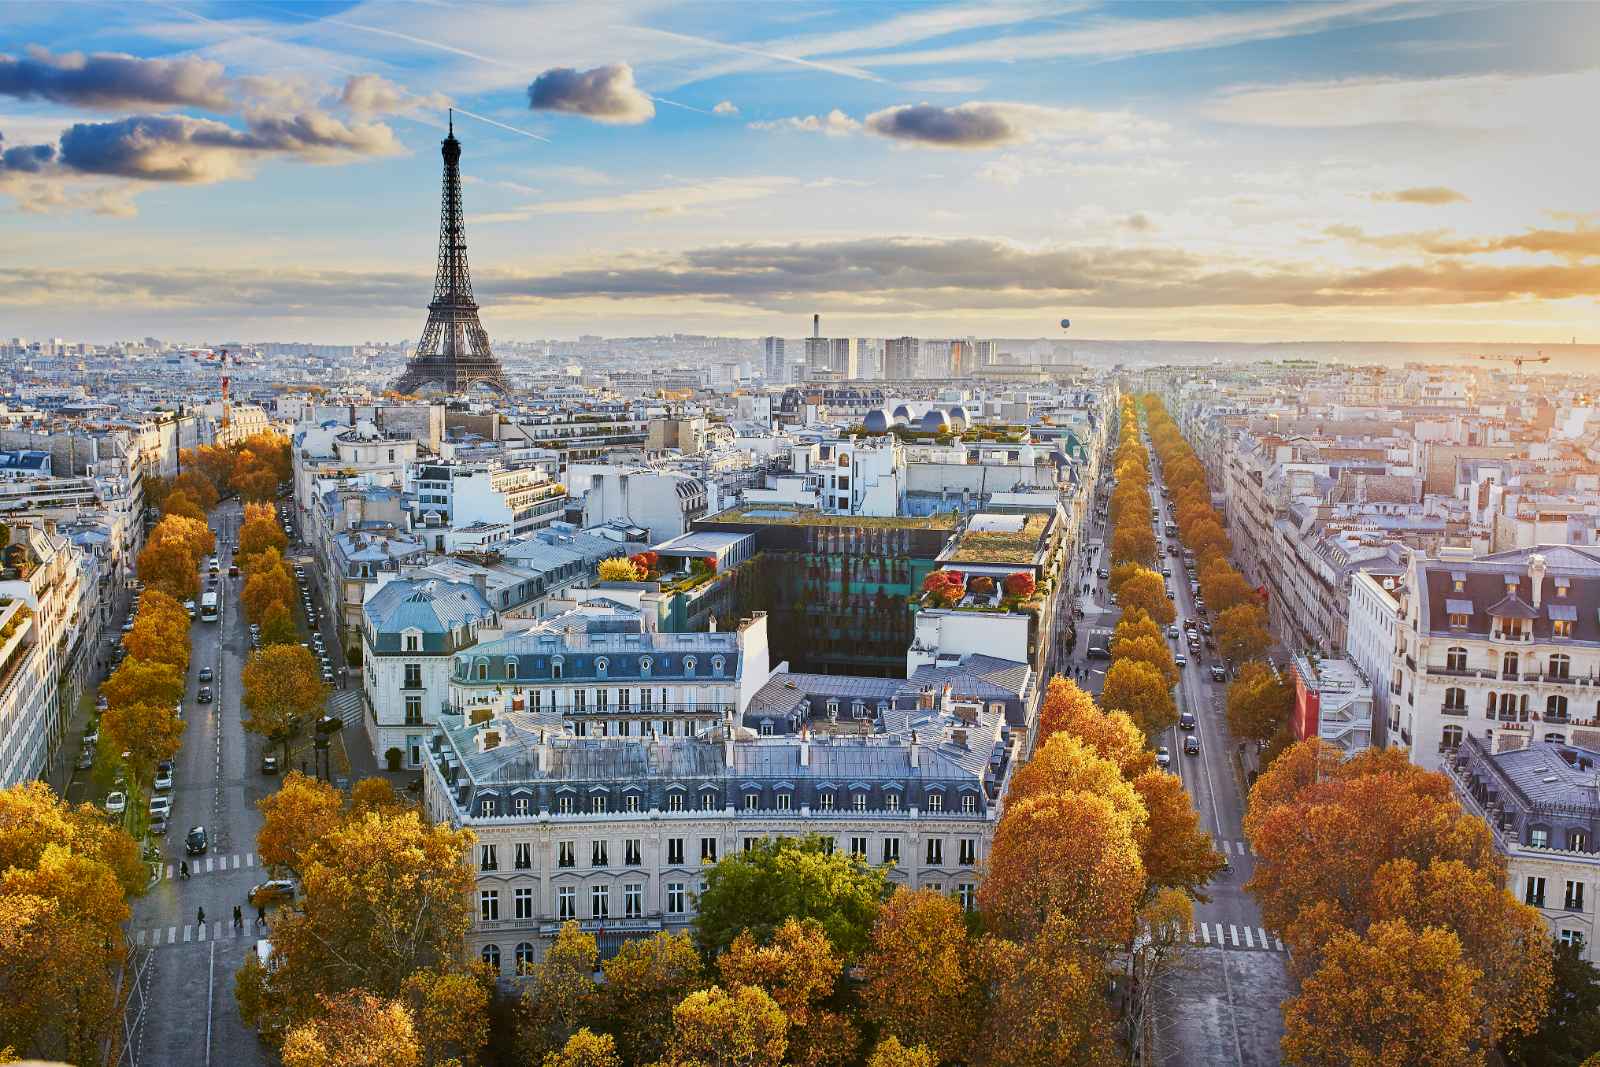 Best Museums in Paris What are the three Musees in Paris